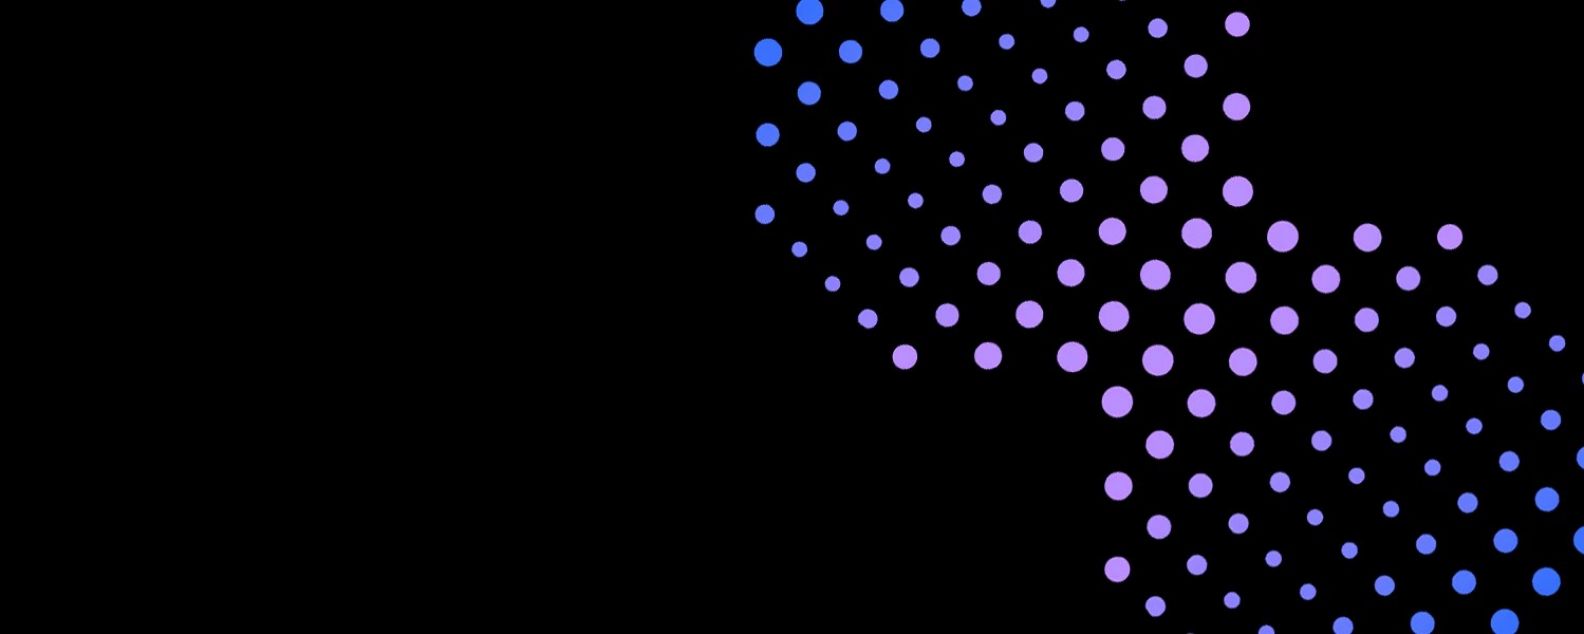 Black background with blue and purple dots